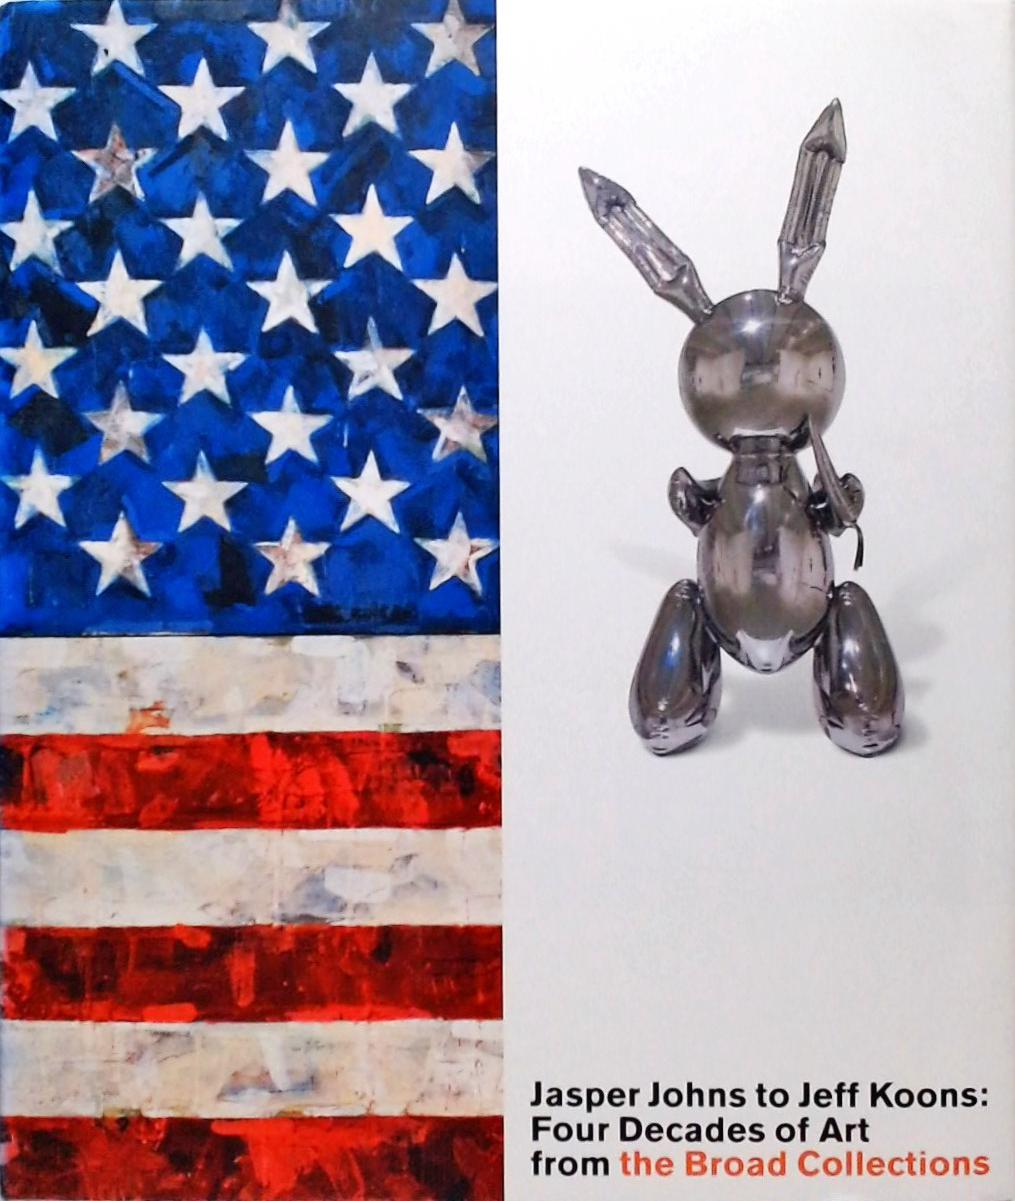 Jasper Johns to Jeff Koons - Four Decades of Art from the Broad Collections